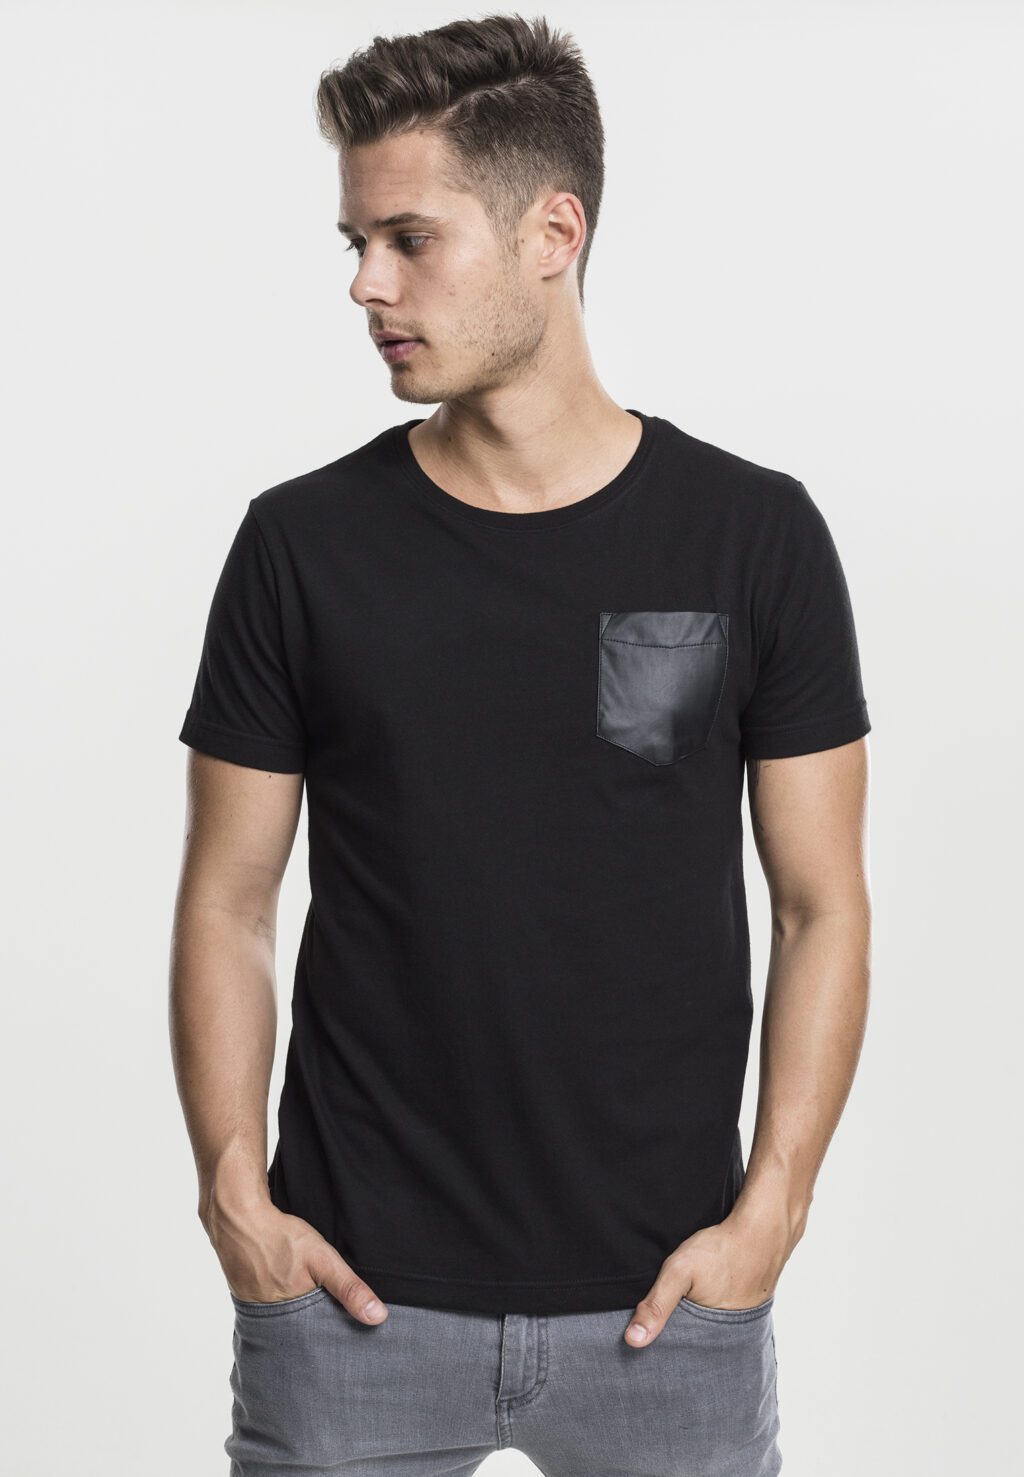 Urban Classics Synthetic Leather Pocket Tee blk/blk TB970